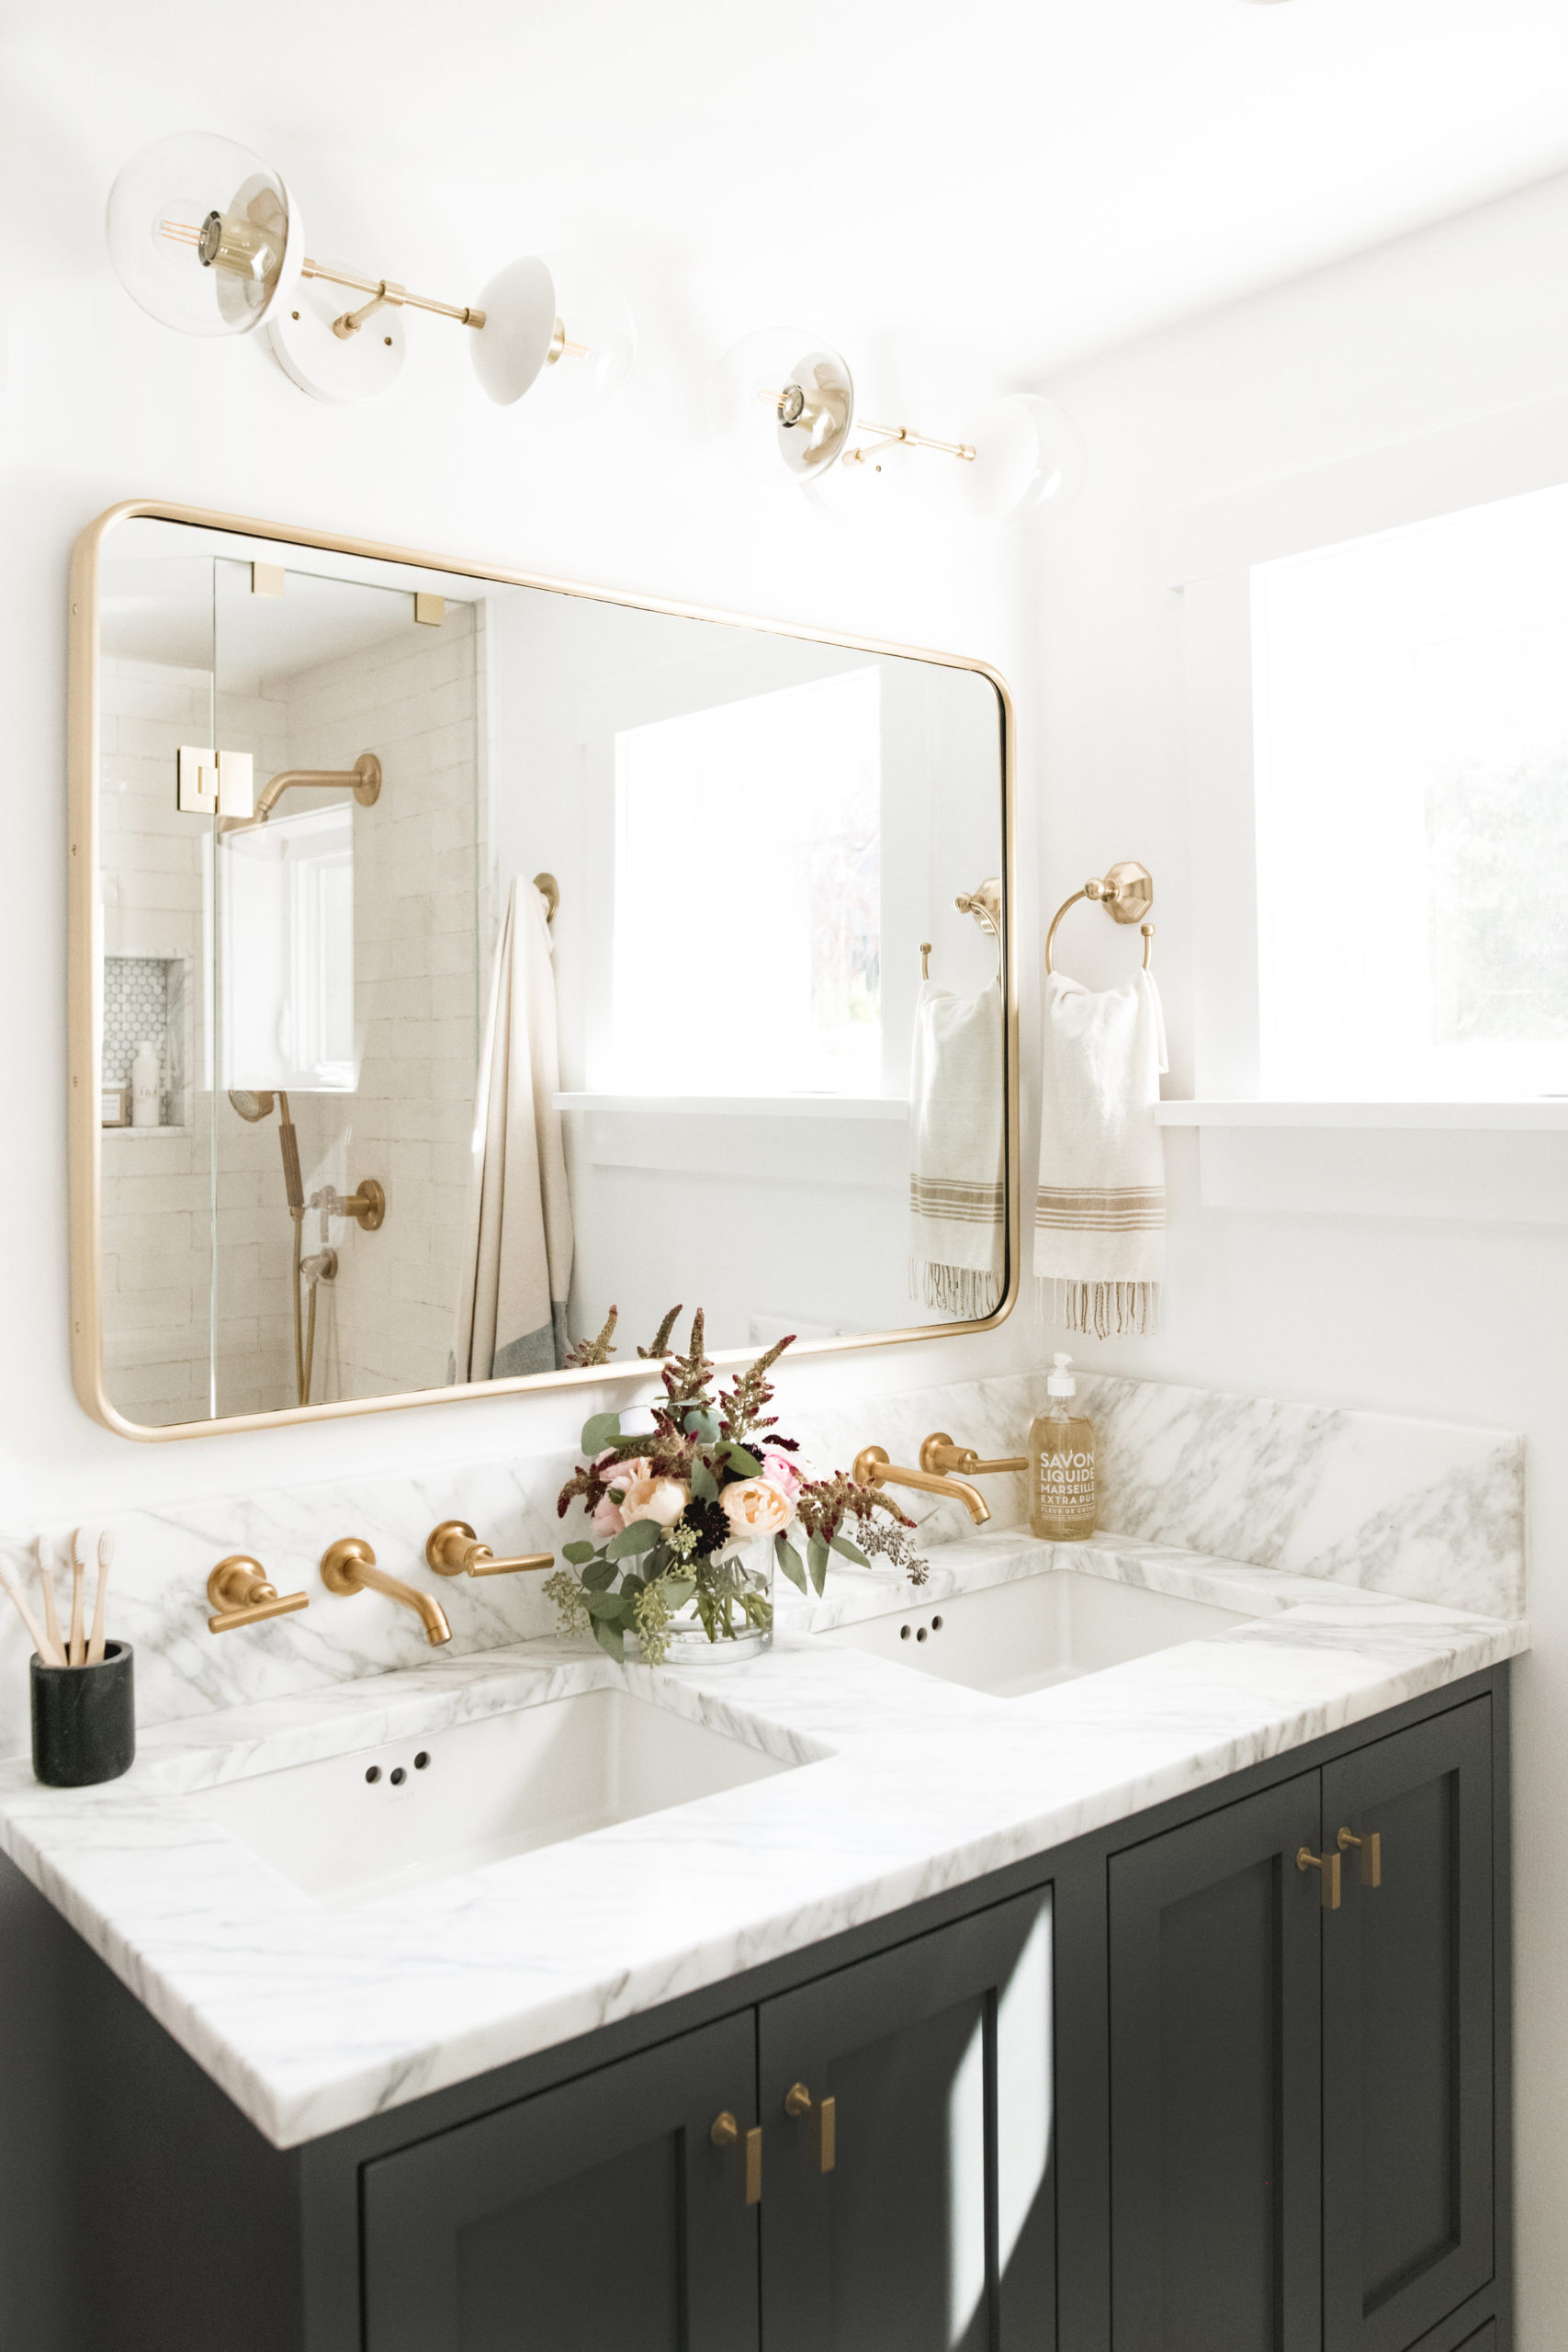 A collection of great ideas for designing your bathroom